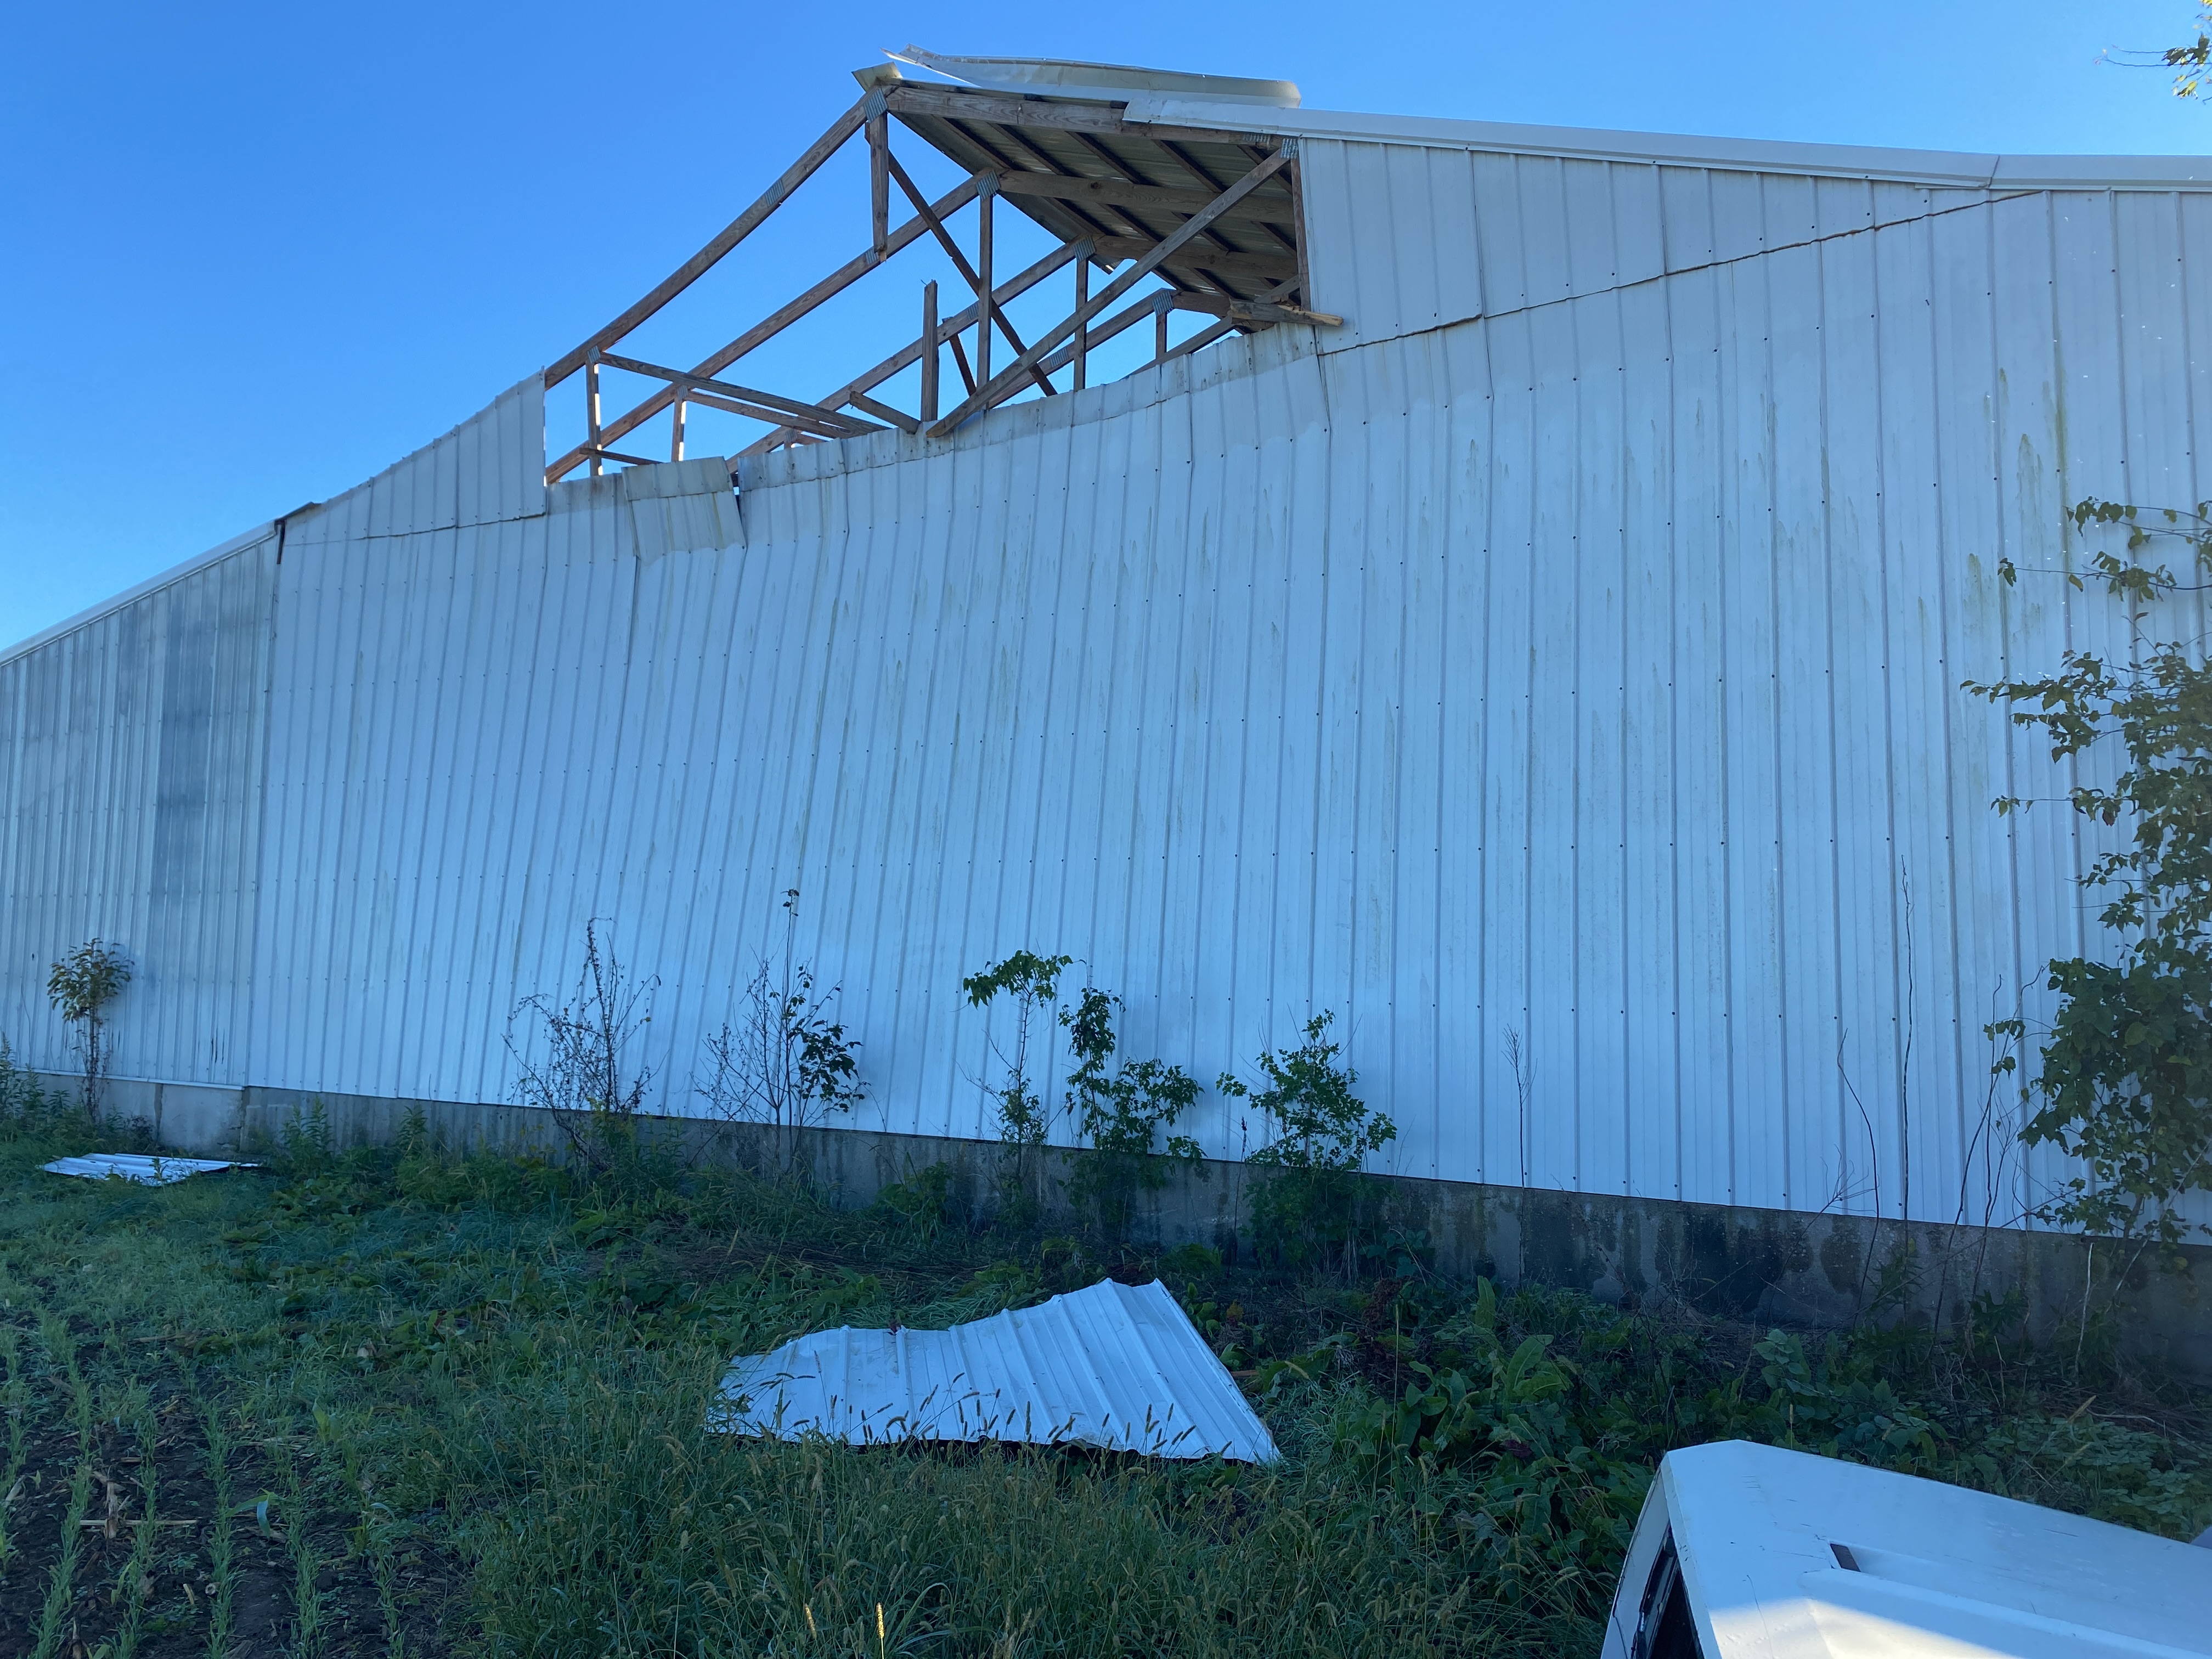 A large outbuilding with white metal siding has lost a portion of it's roof and some of the metal siding, which lies on the grass in the foreground.